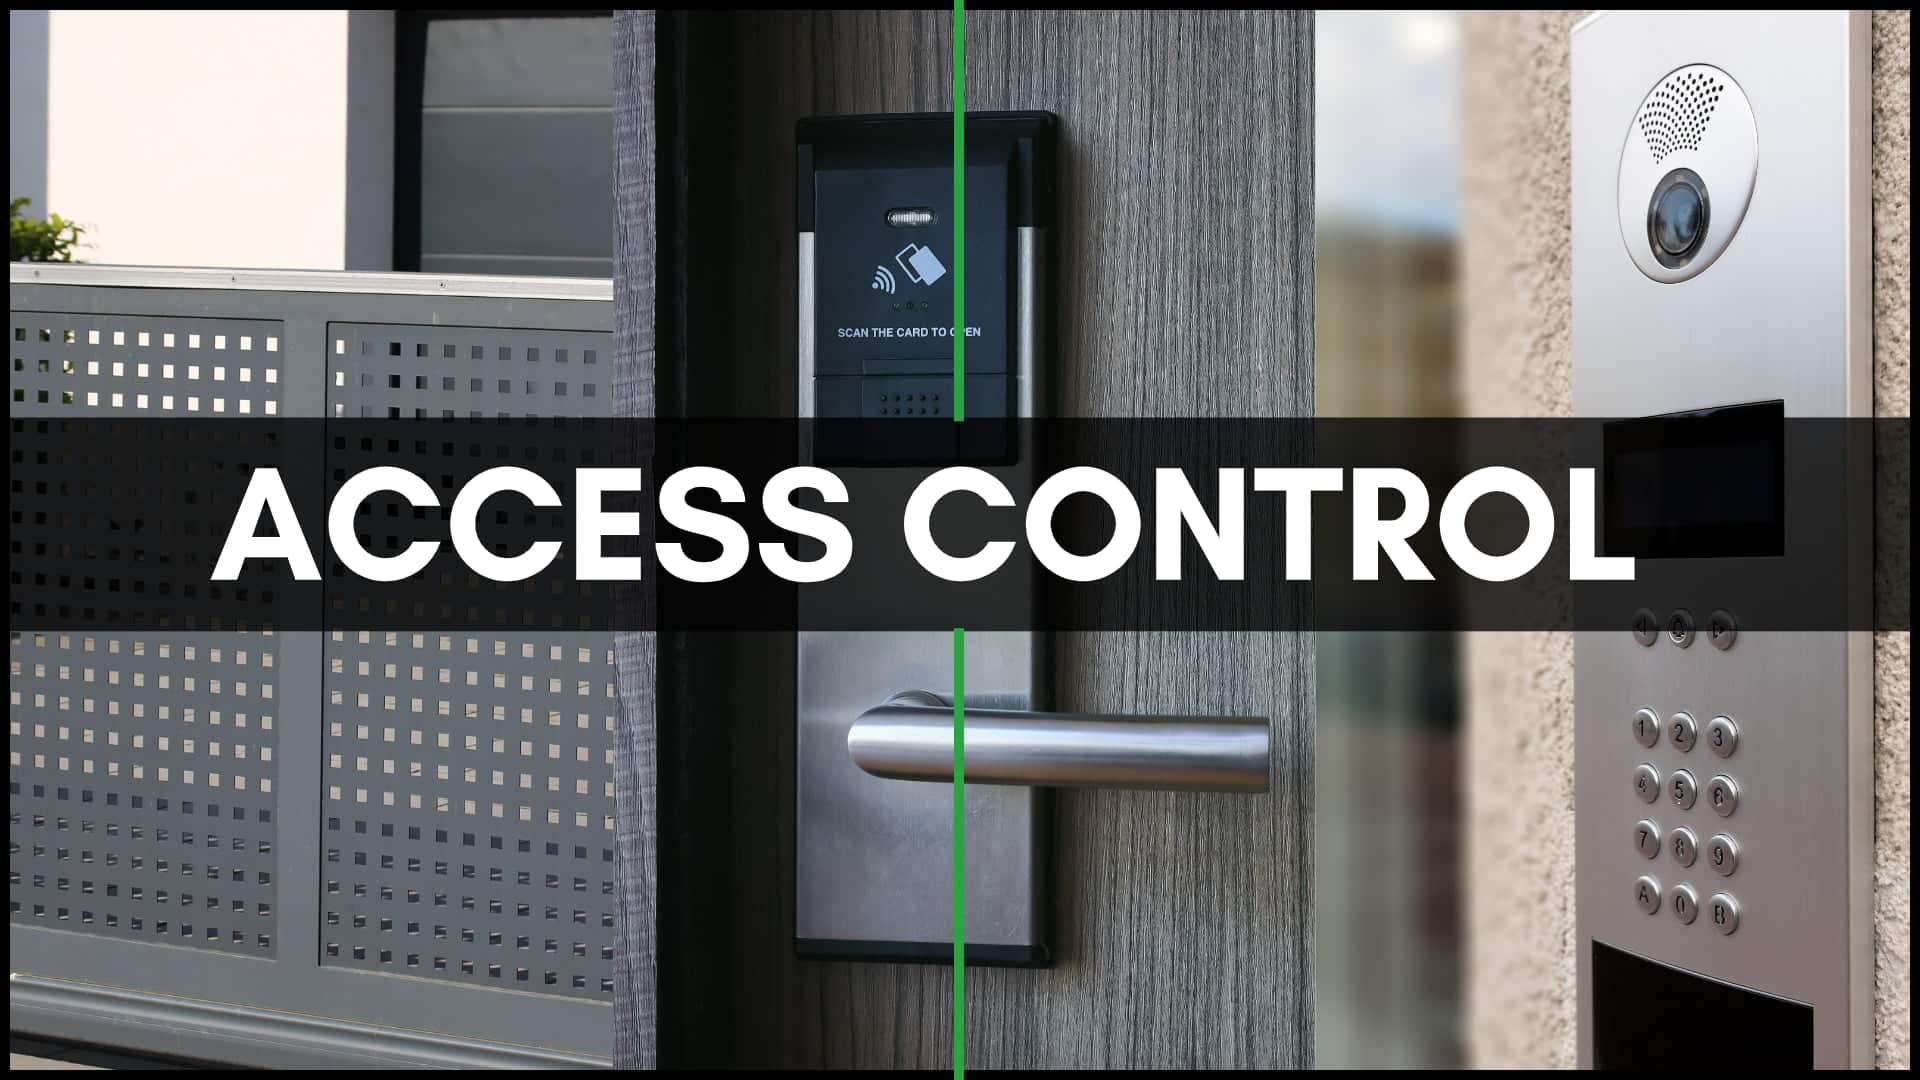 Knx Access Control Application